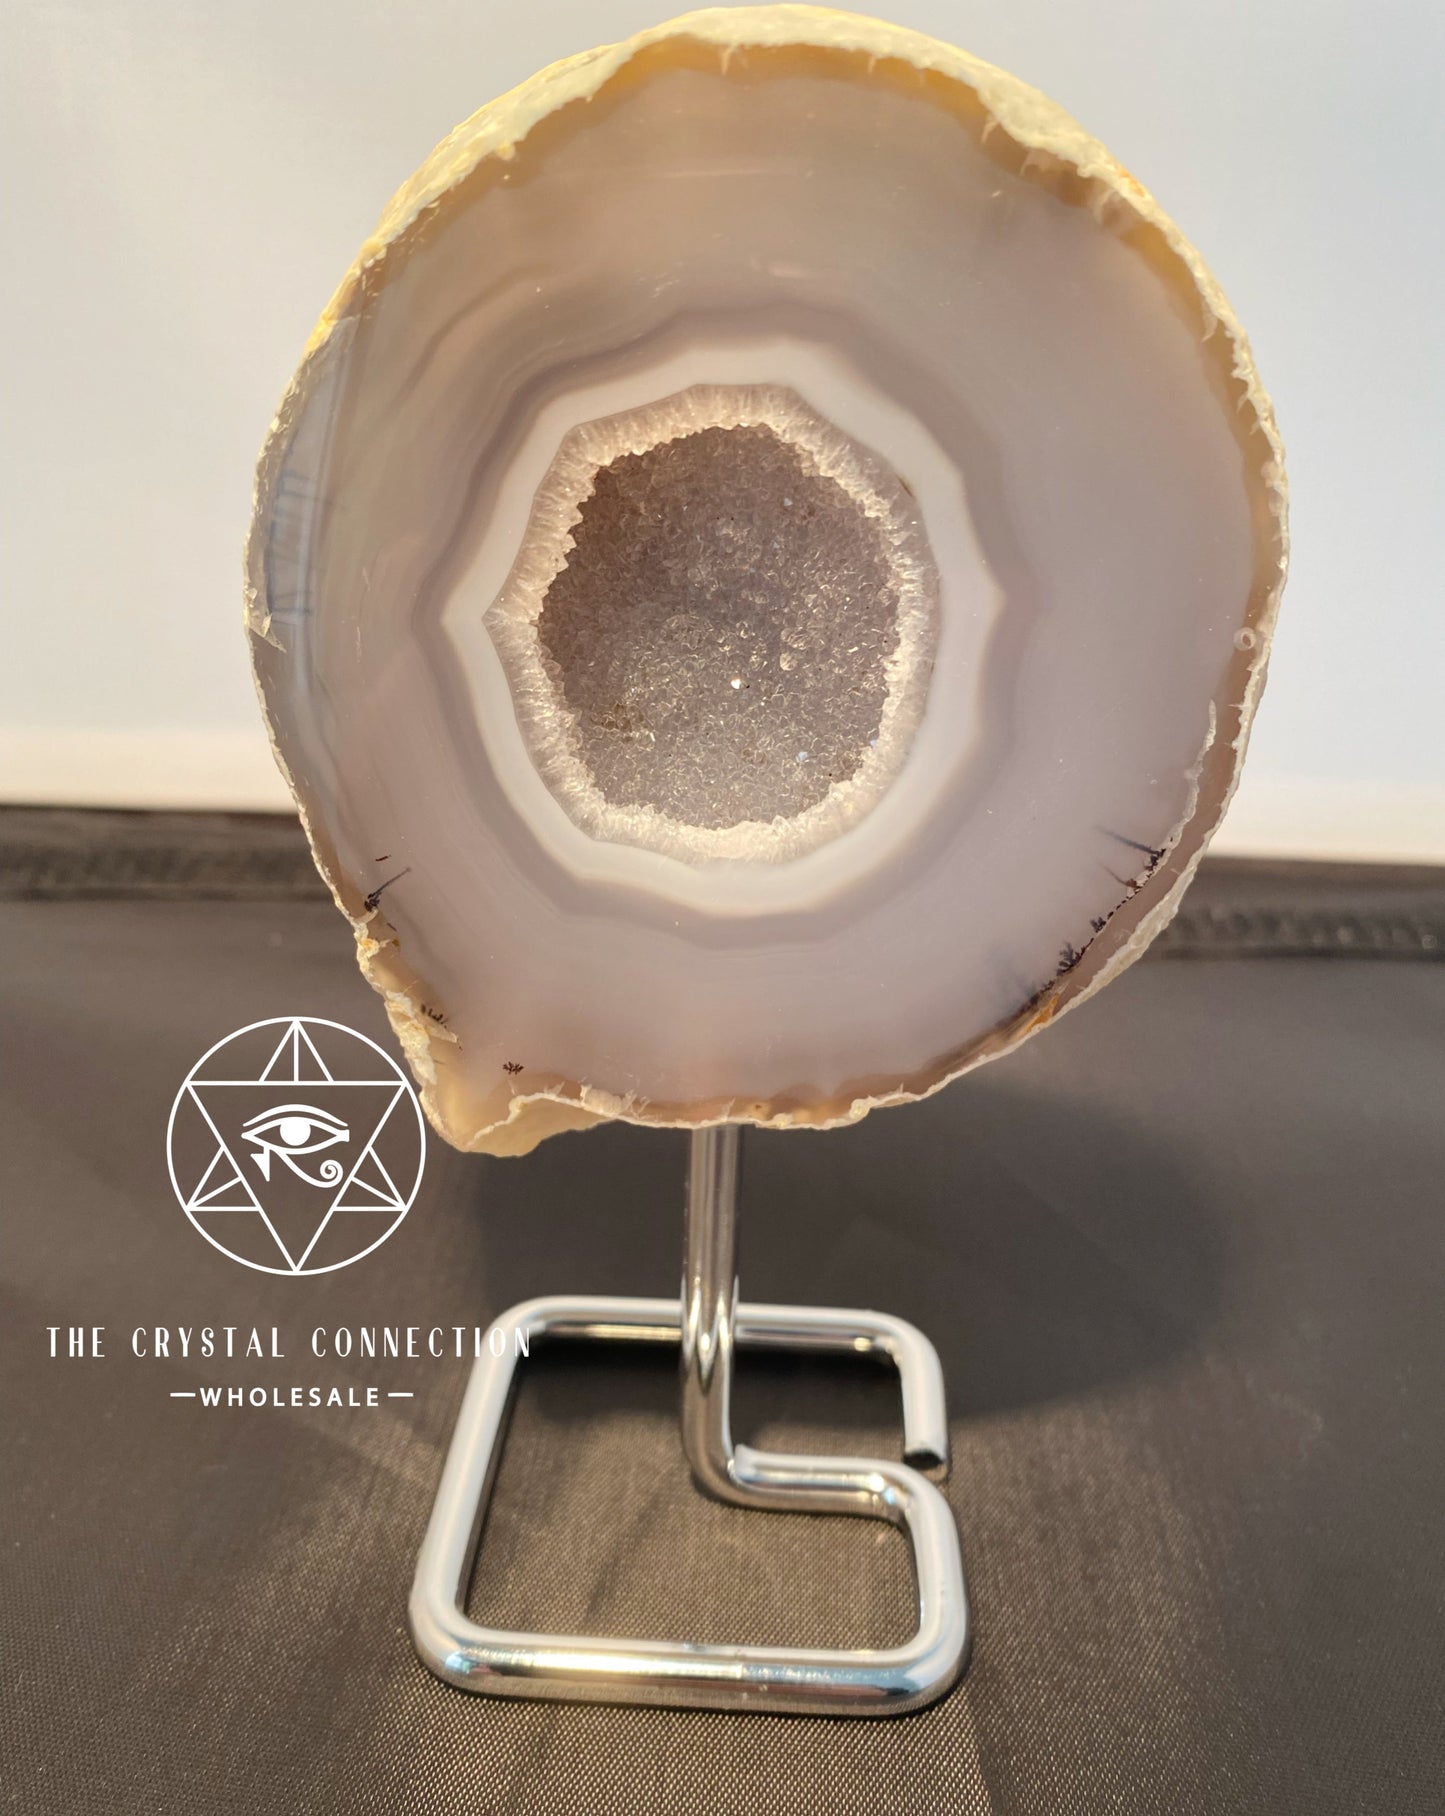 Druzy Agate Geode on stand